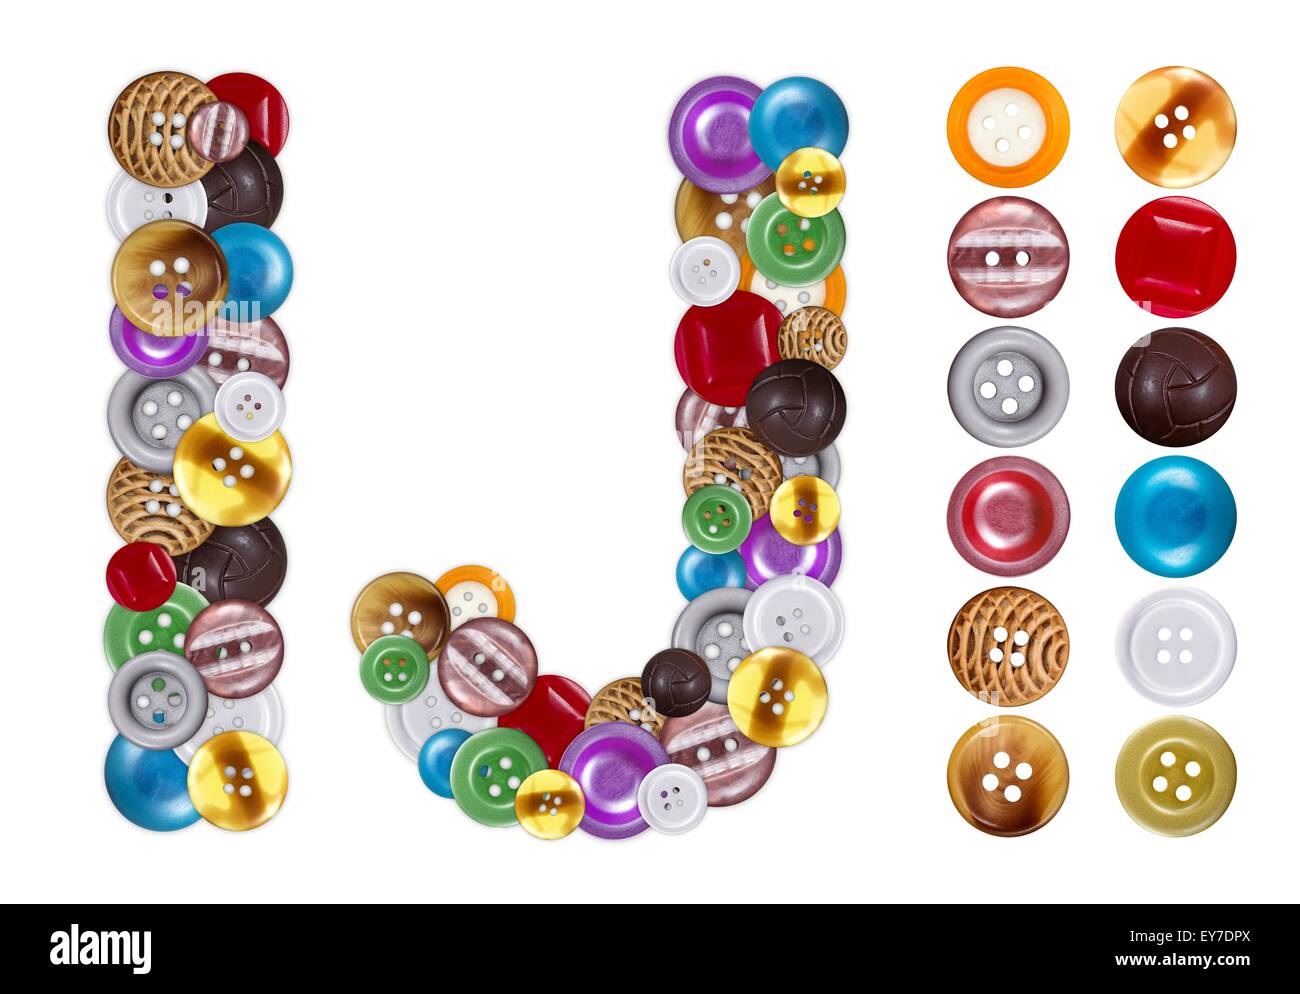 Characters I and J made of colorful clothing buttons. Standalone design elements attached Stock Photo